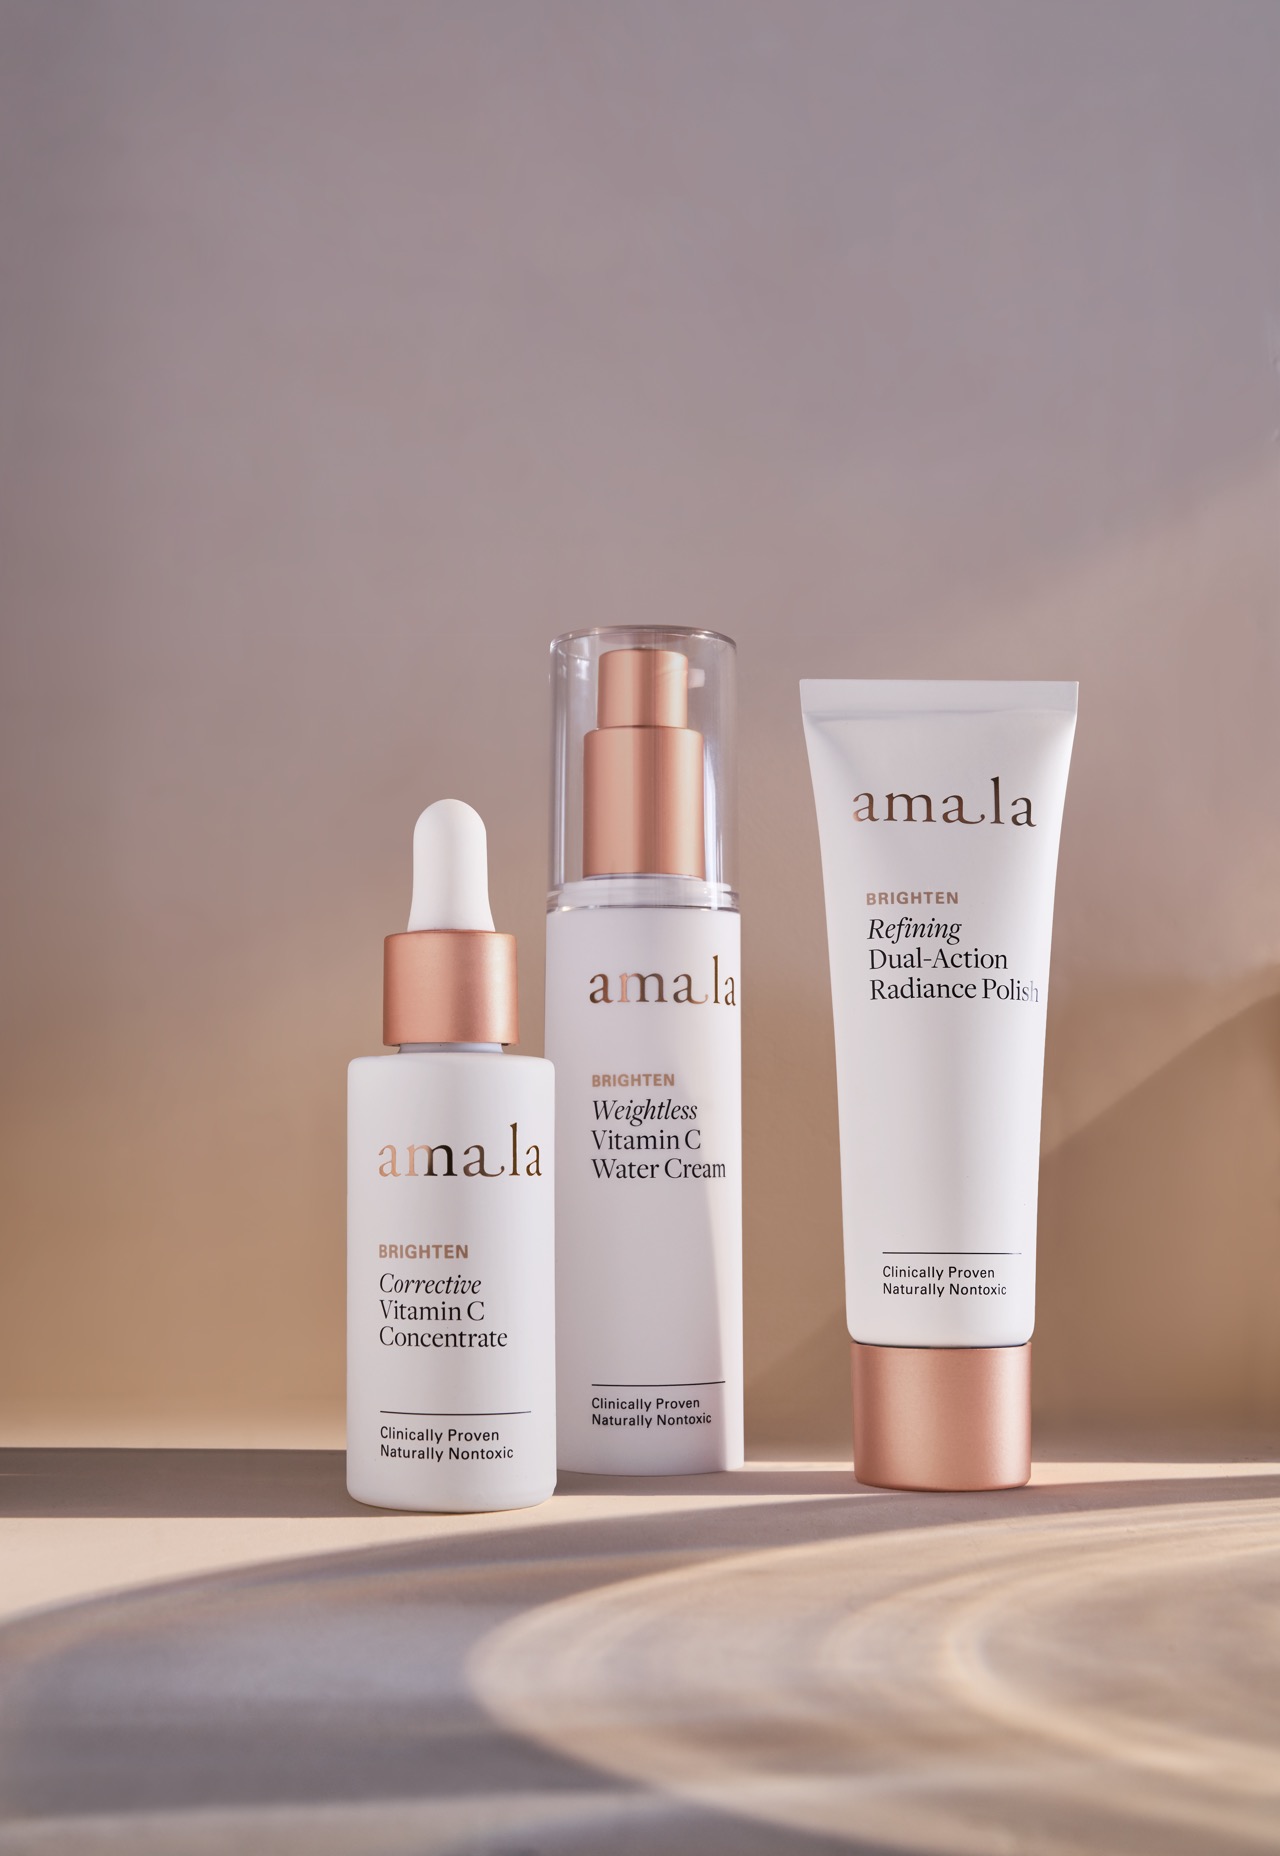 Three Amala products. Corrective Vitamin C concentrate, Weightless Vitamin C water cream, and Refining Dual-Action Radiance Polish